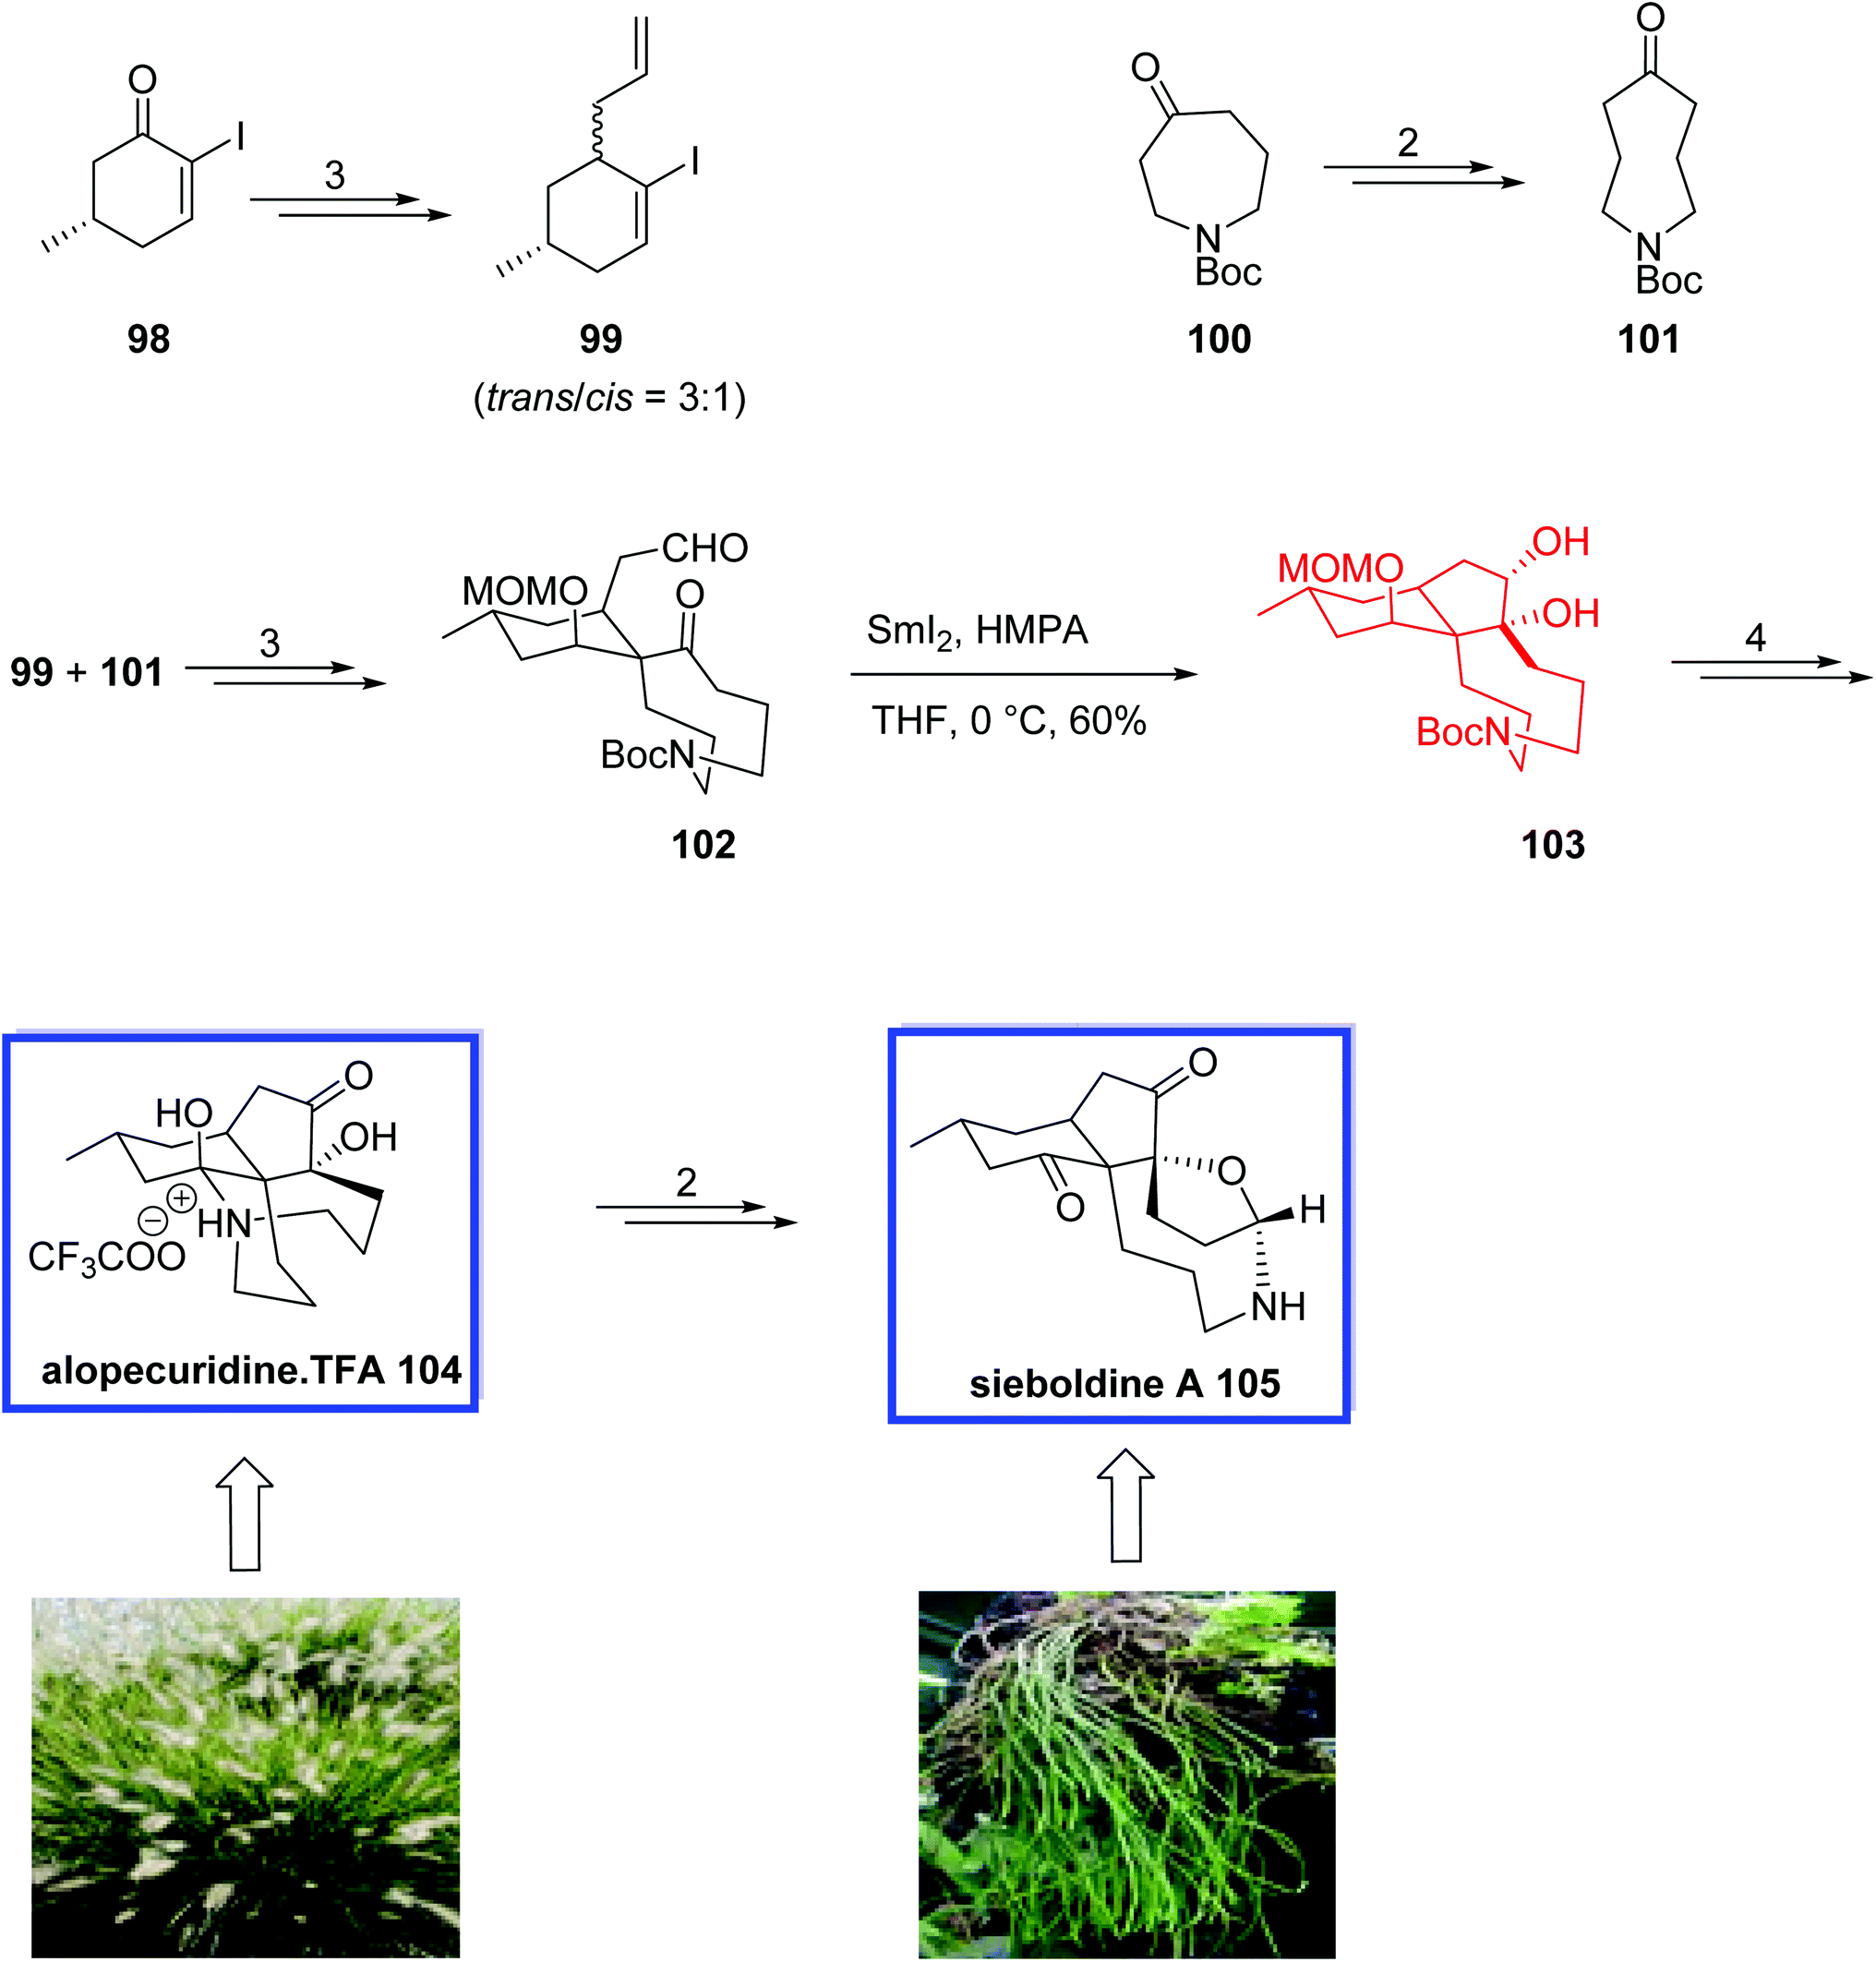 Samarium(II)‐Promoted Cyclizations of Nonactivated Indolyl